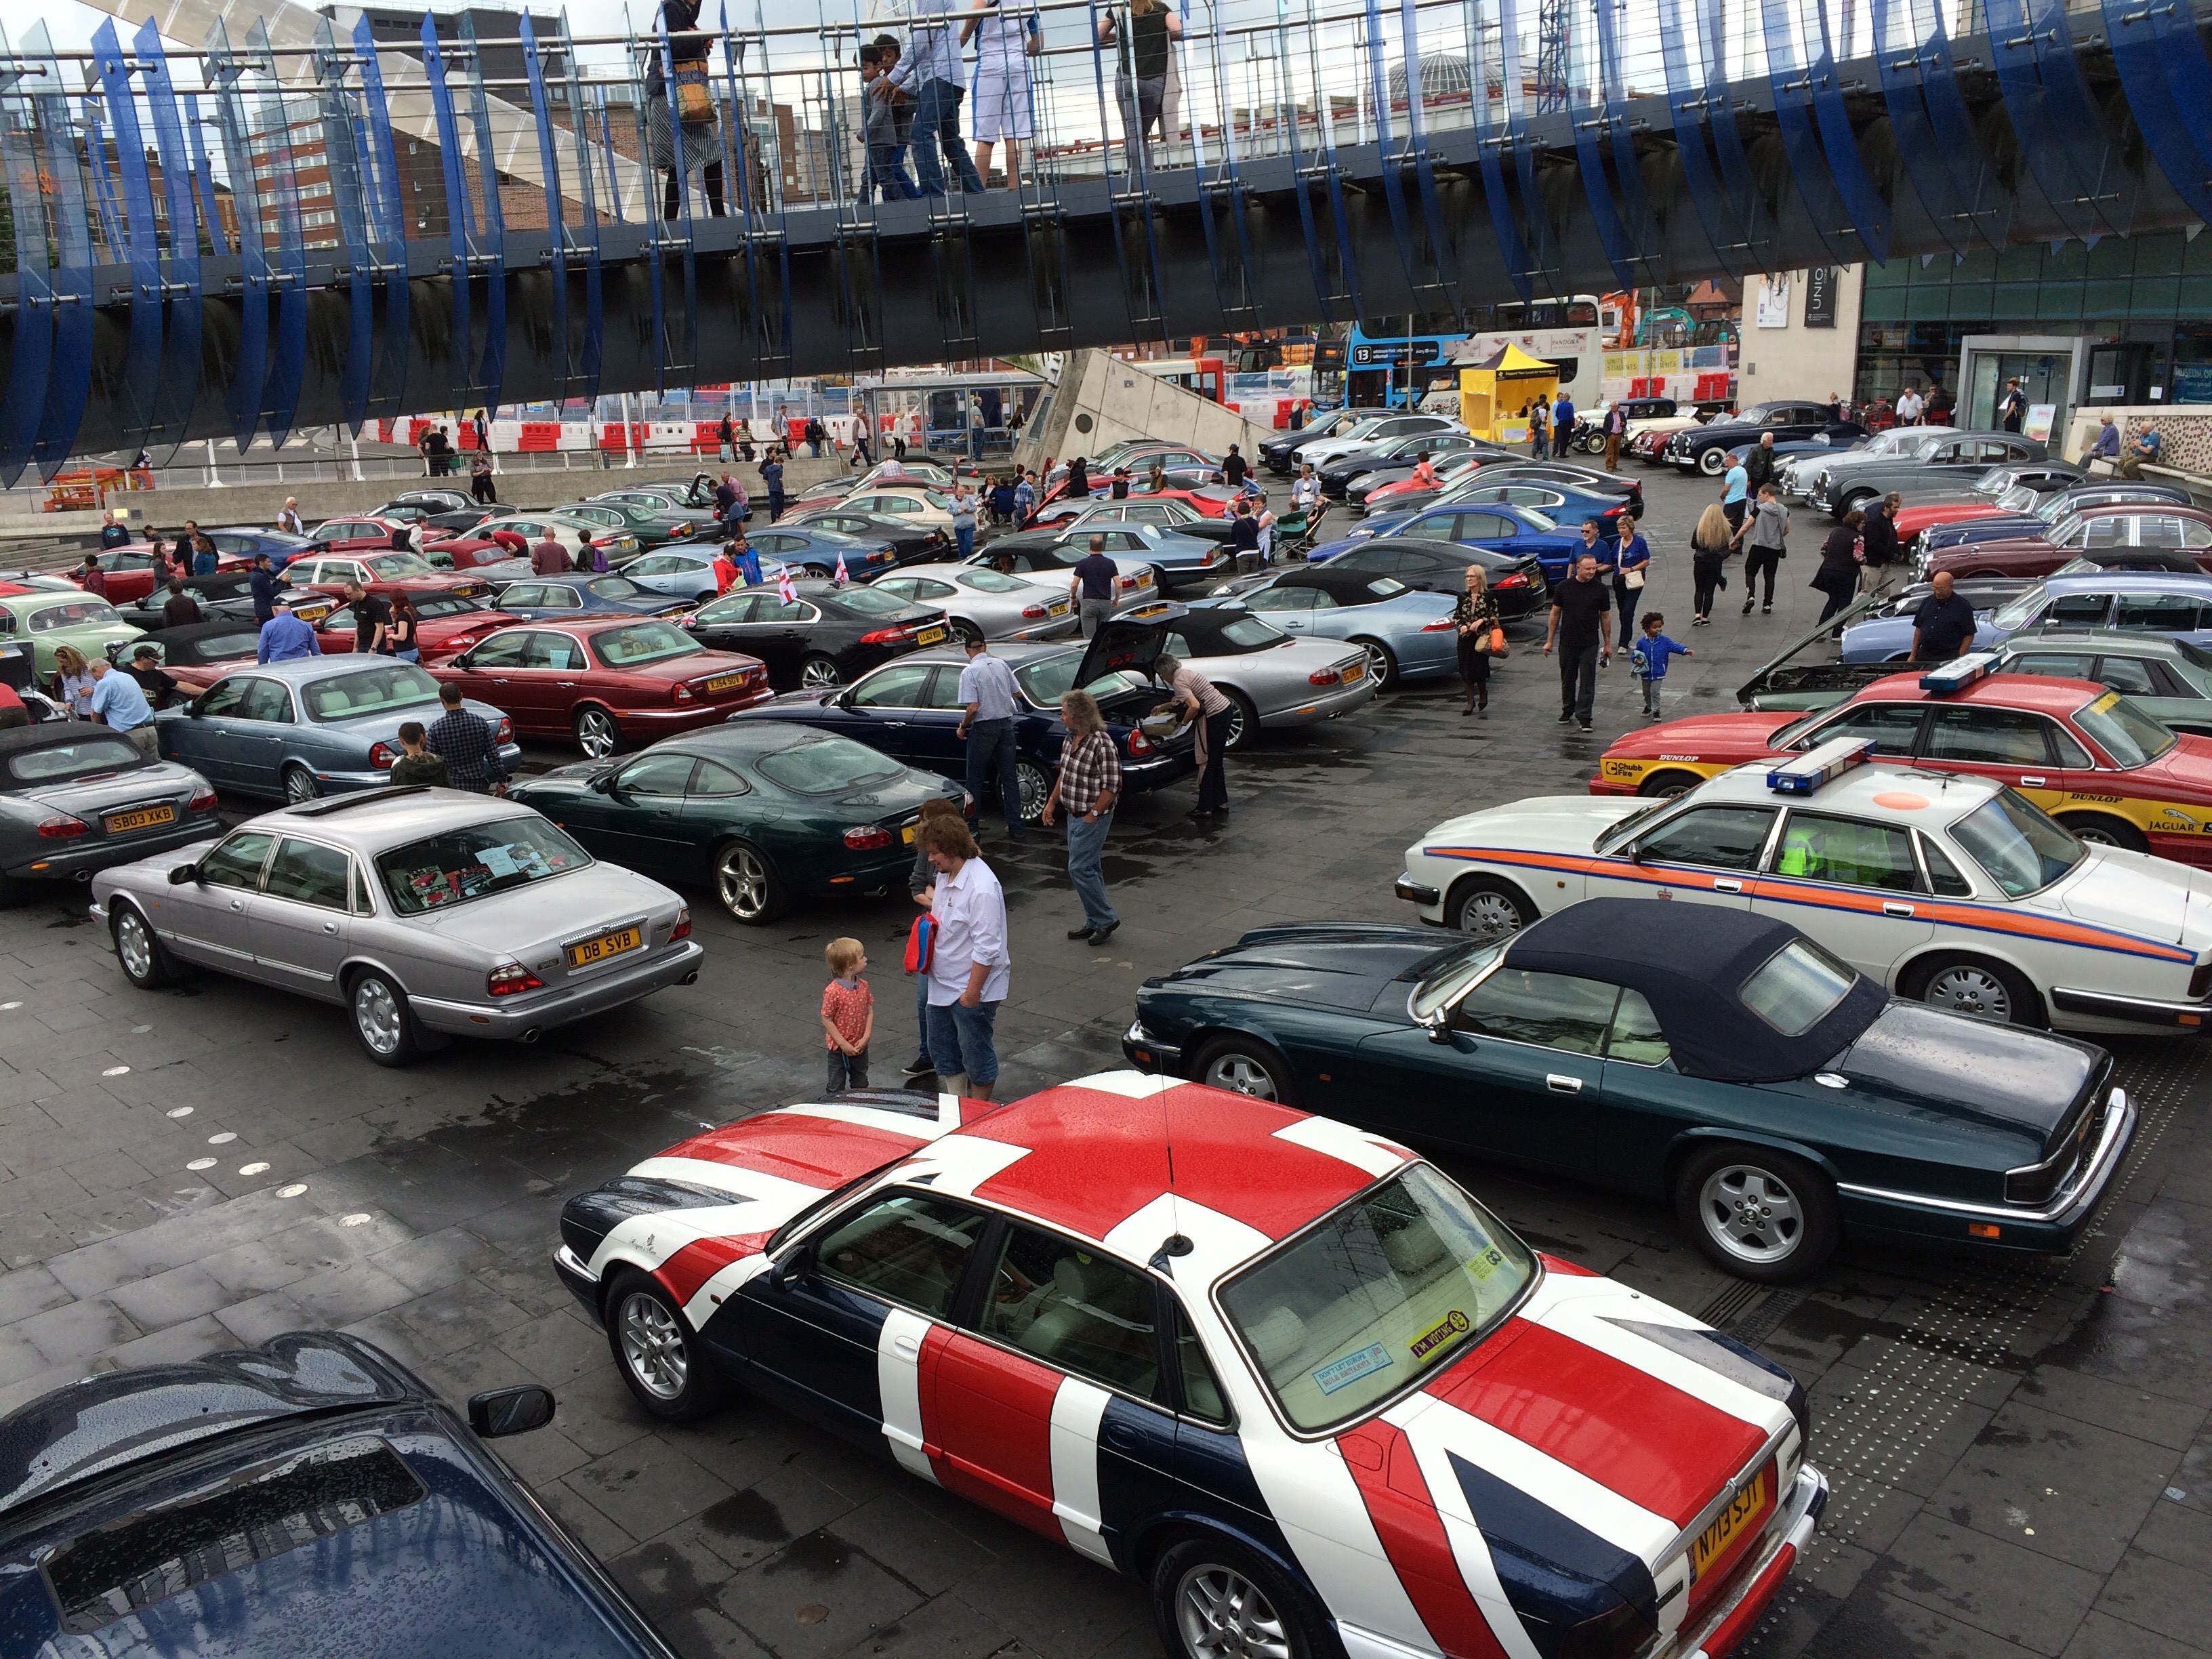  a display of Jaguar cars fills the space outside the Museum